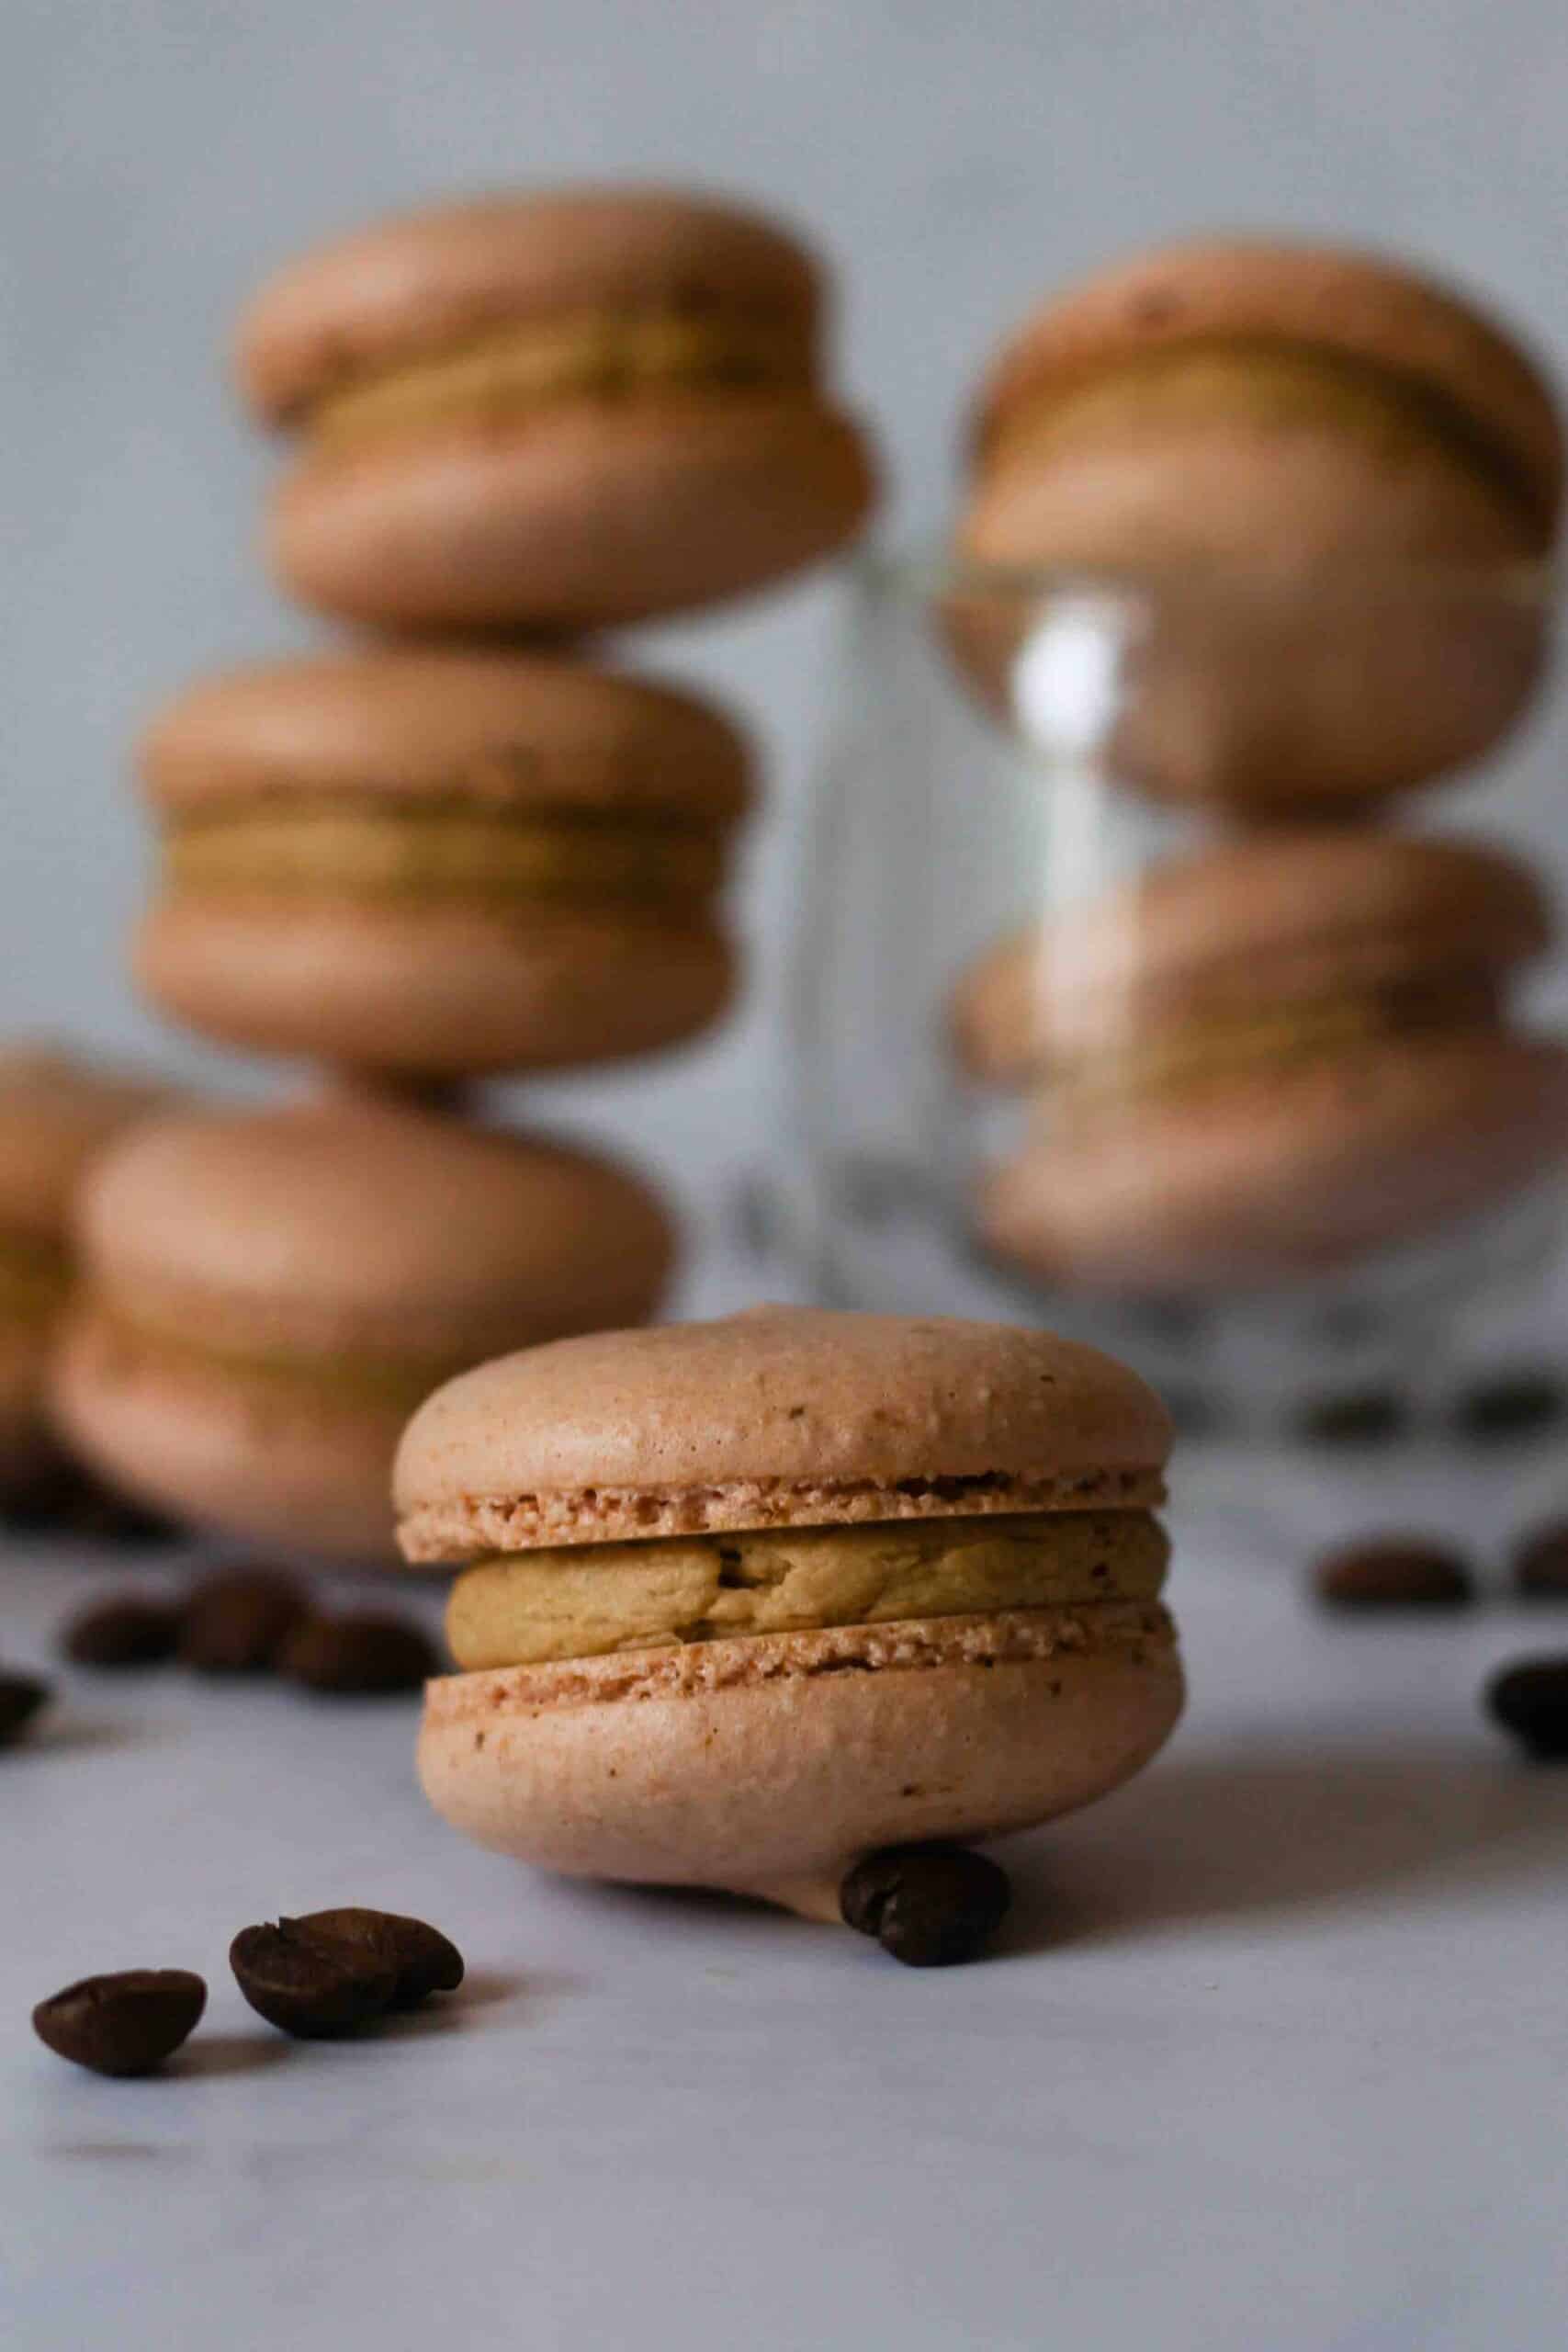 Coffee macarons with macarons stacked in the background and a close up off one in the front.